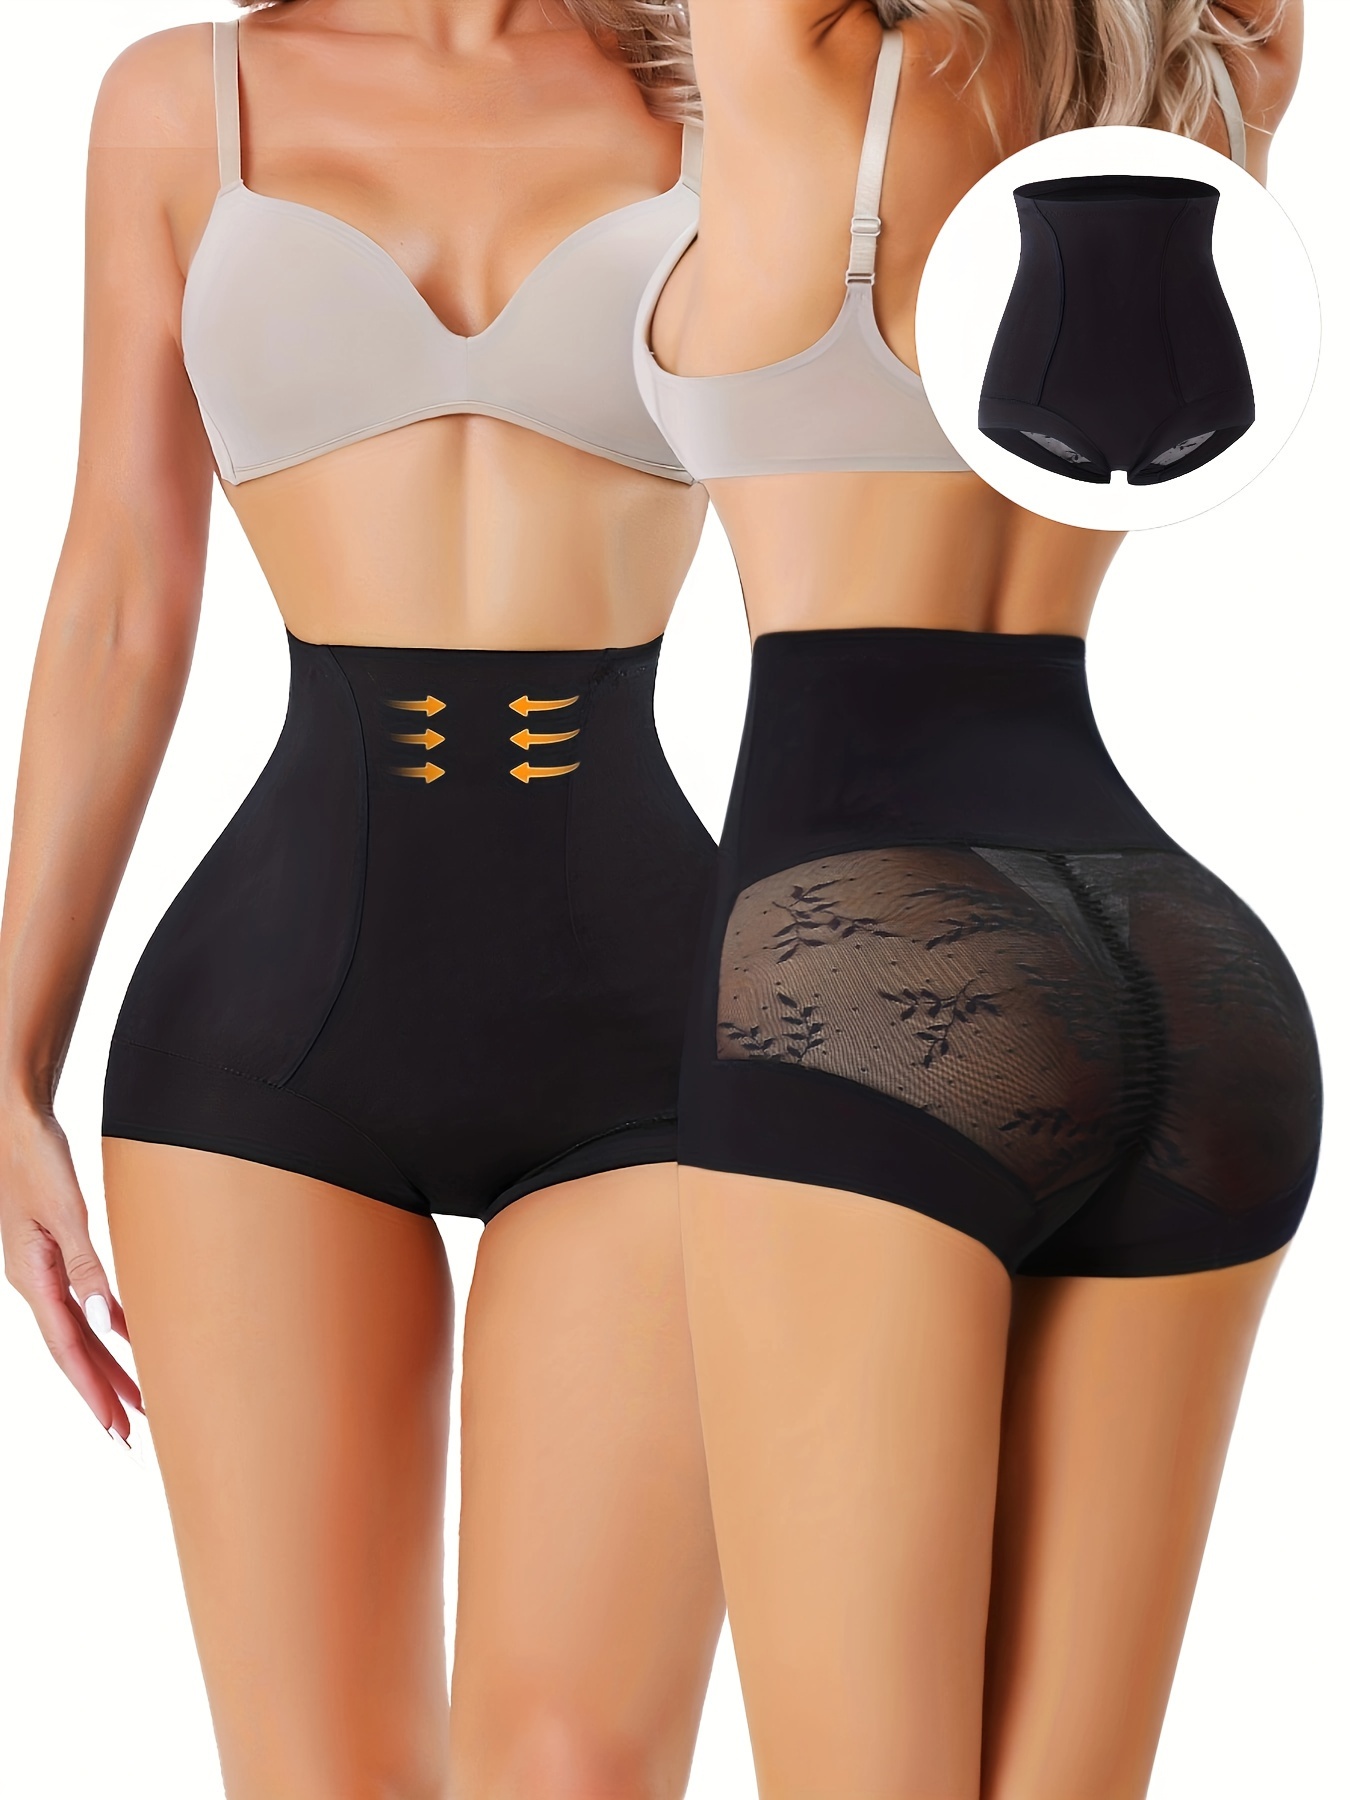 Cheap Women 9 Breasted High Waist Crotchless Bodysuit Shapewear Booty  Lifter Compression Underwear Belly Control Slimming Body Shaper